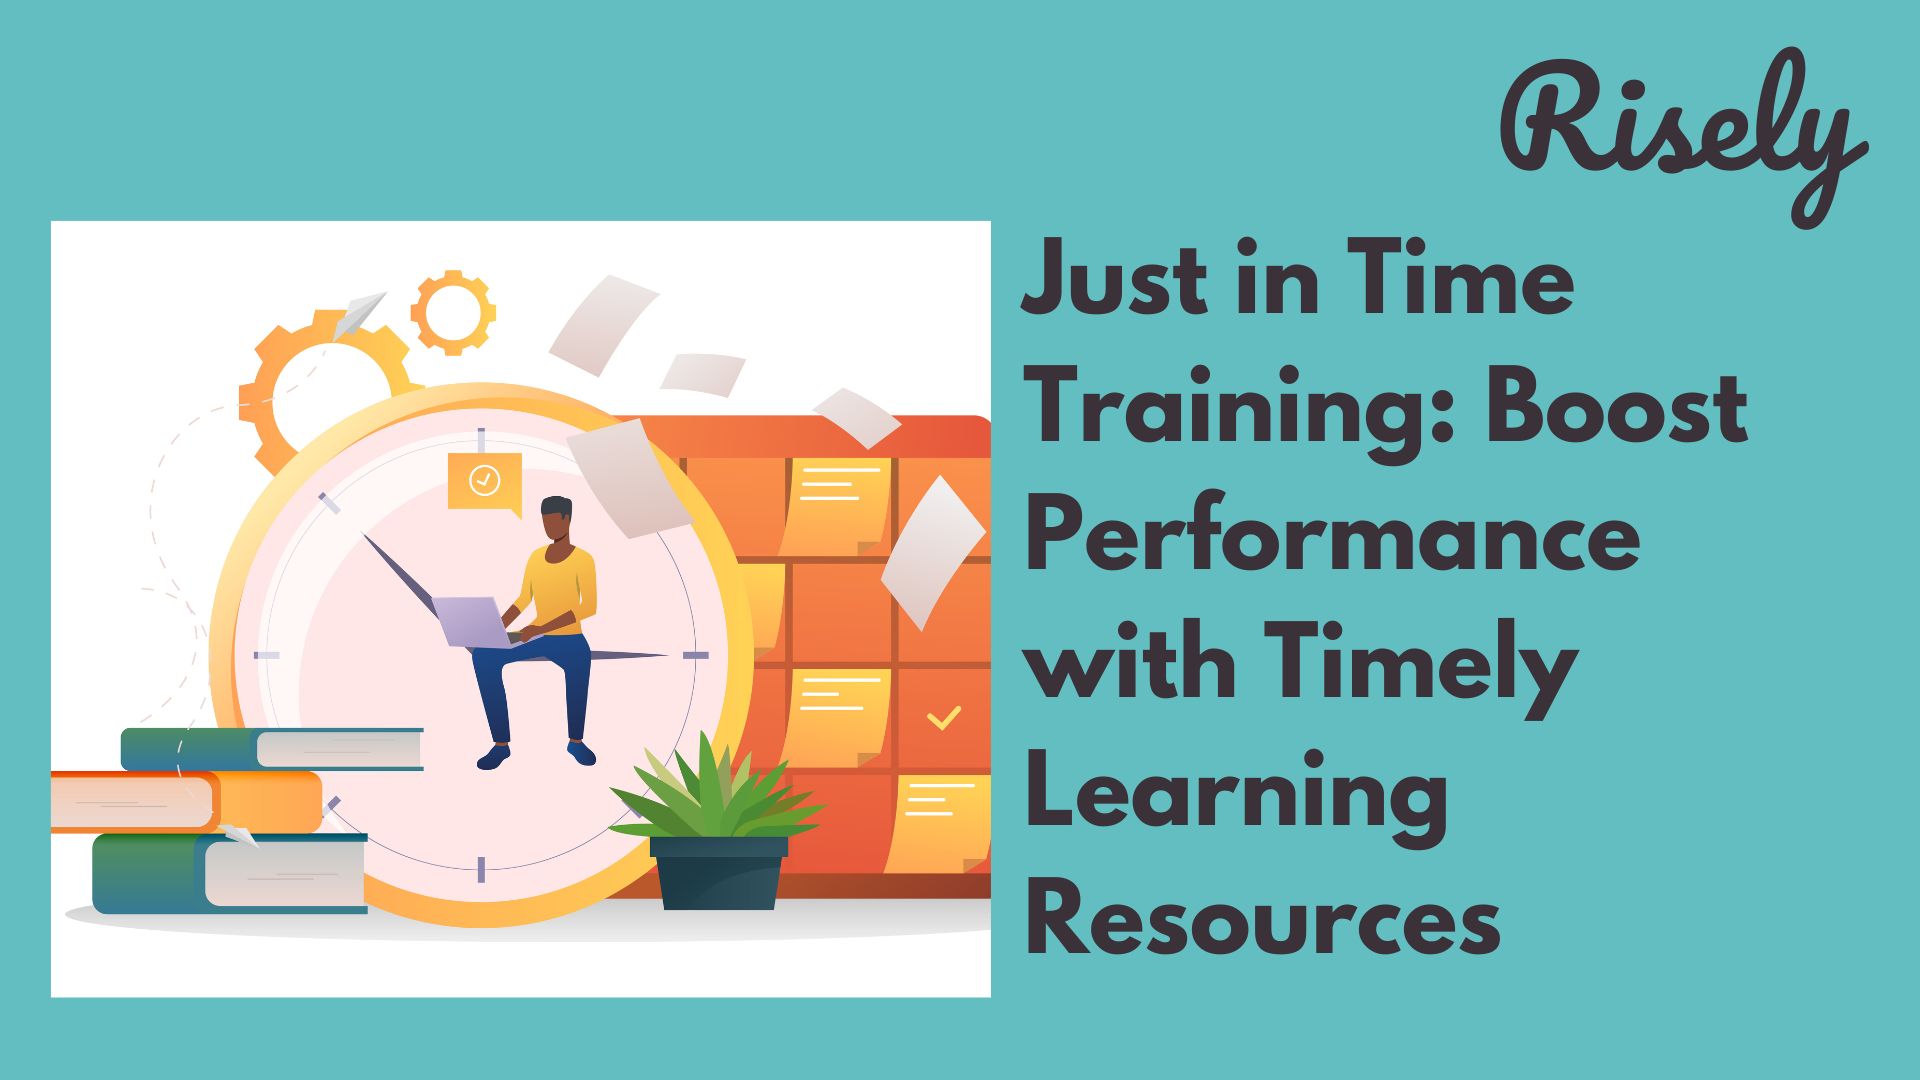 Just in Time Training: Boost Performance with Timely Learning Resources